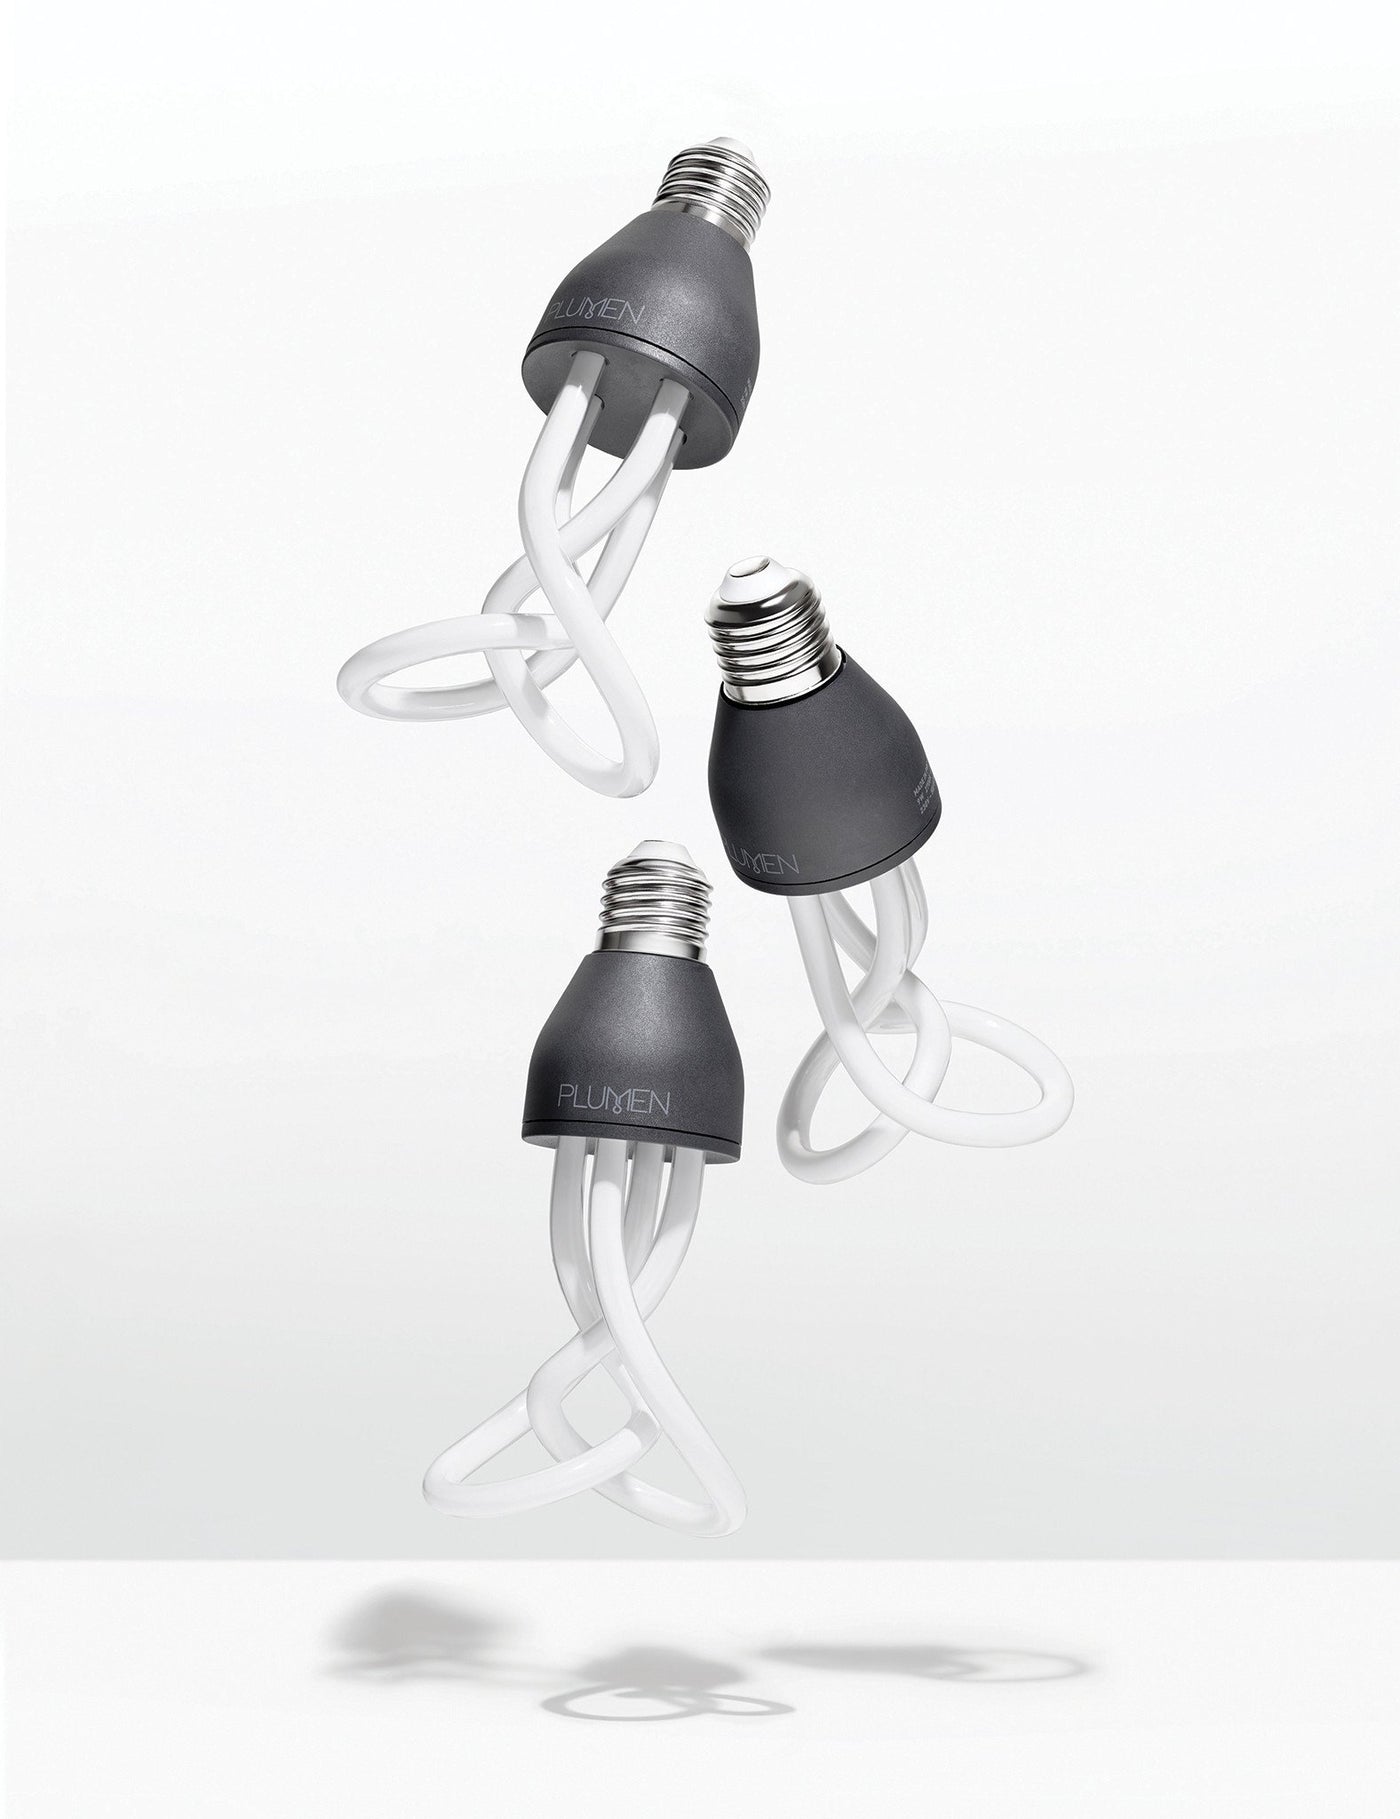 Ray of Light Shade with Baby Plumen 001 Bulb